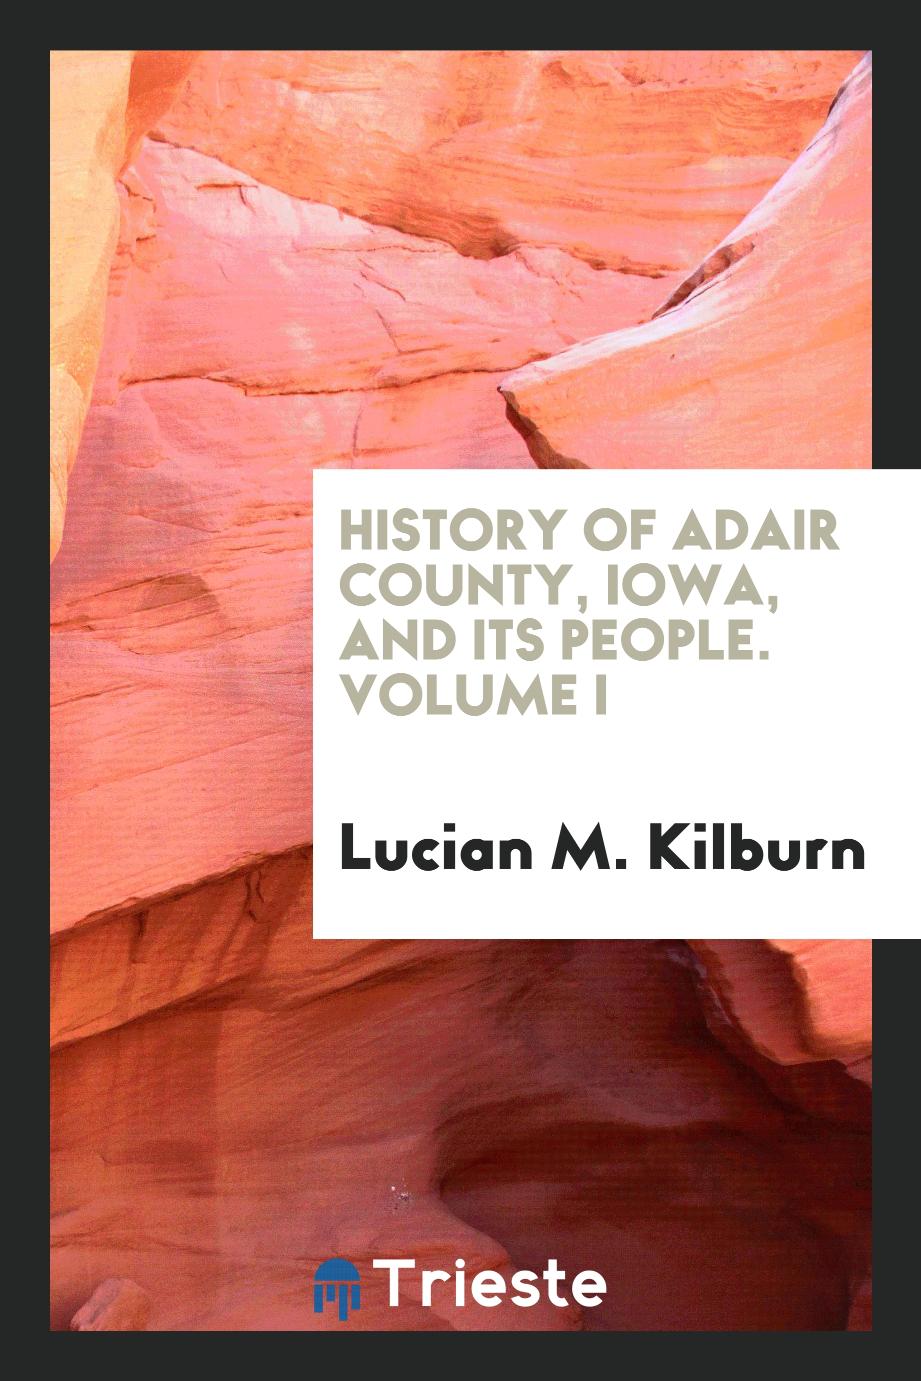 History of Adair County, Iowa, and Its People. Volume I